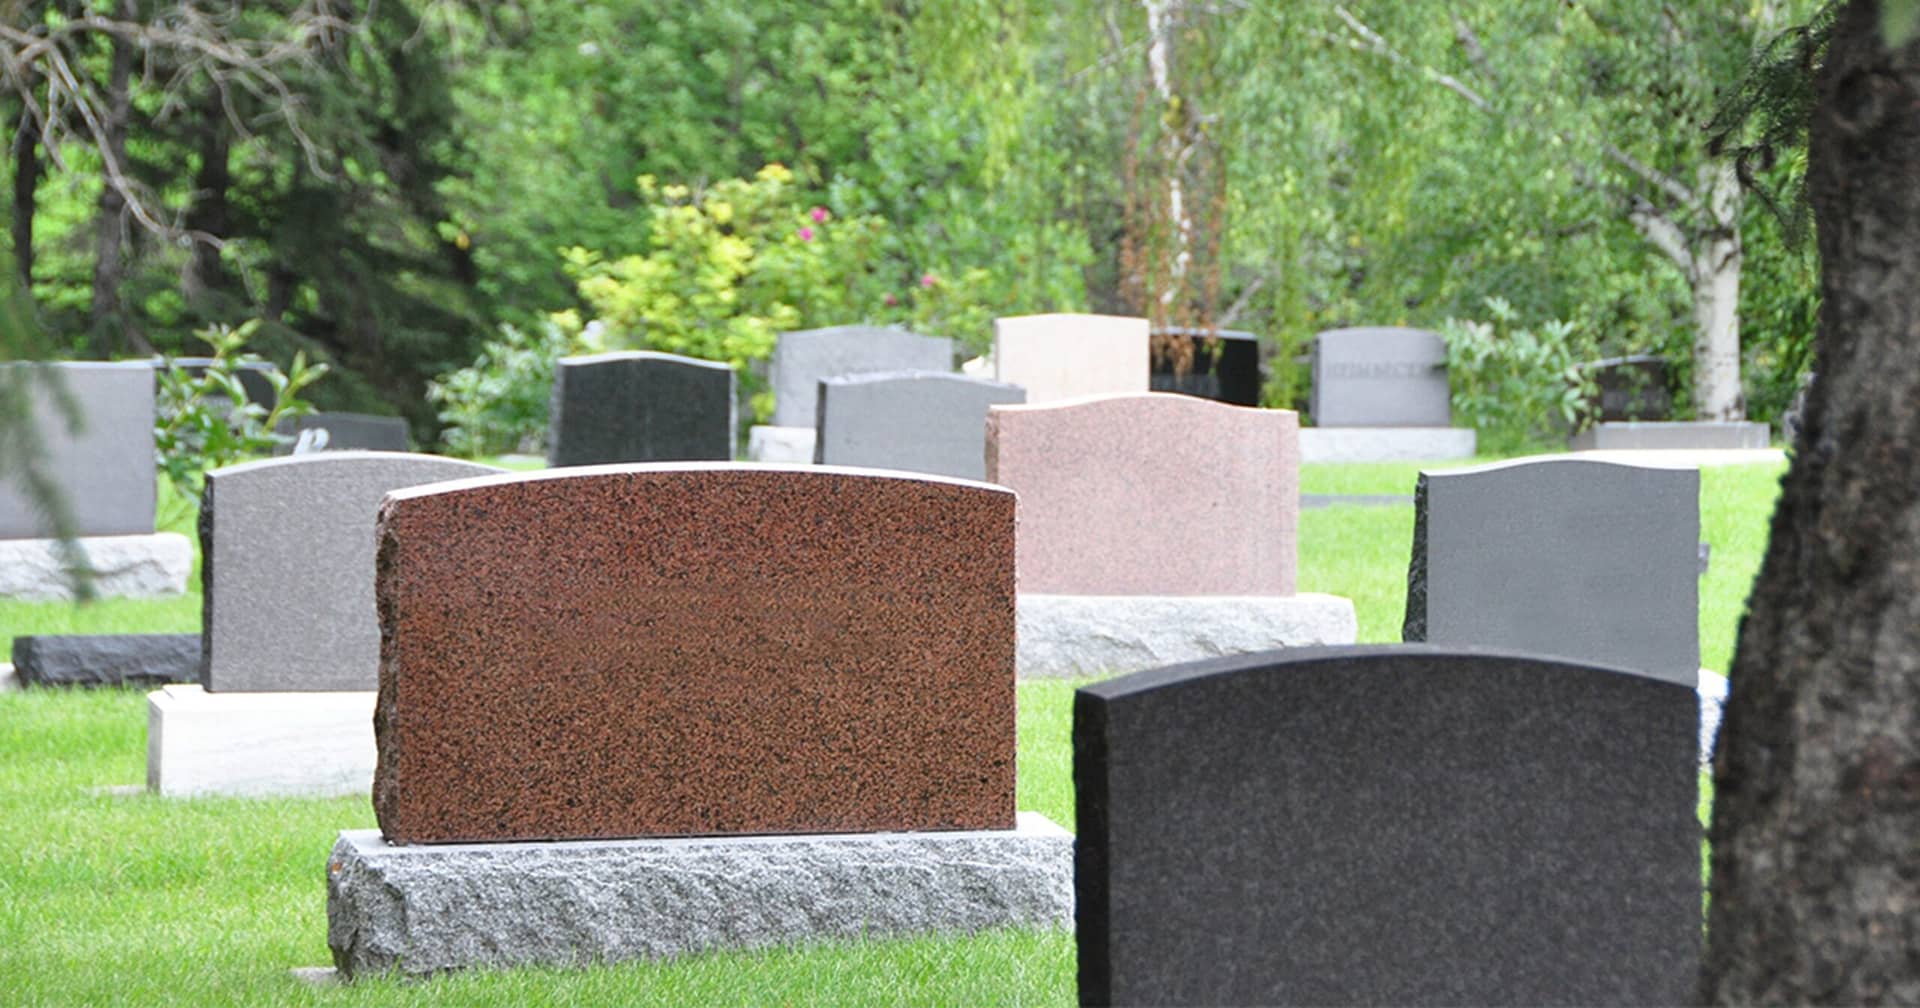 Headstone Installation & Purchase Guide